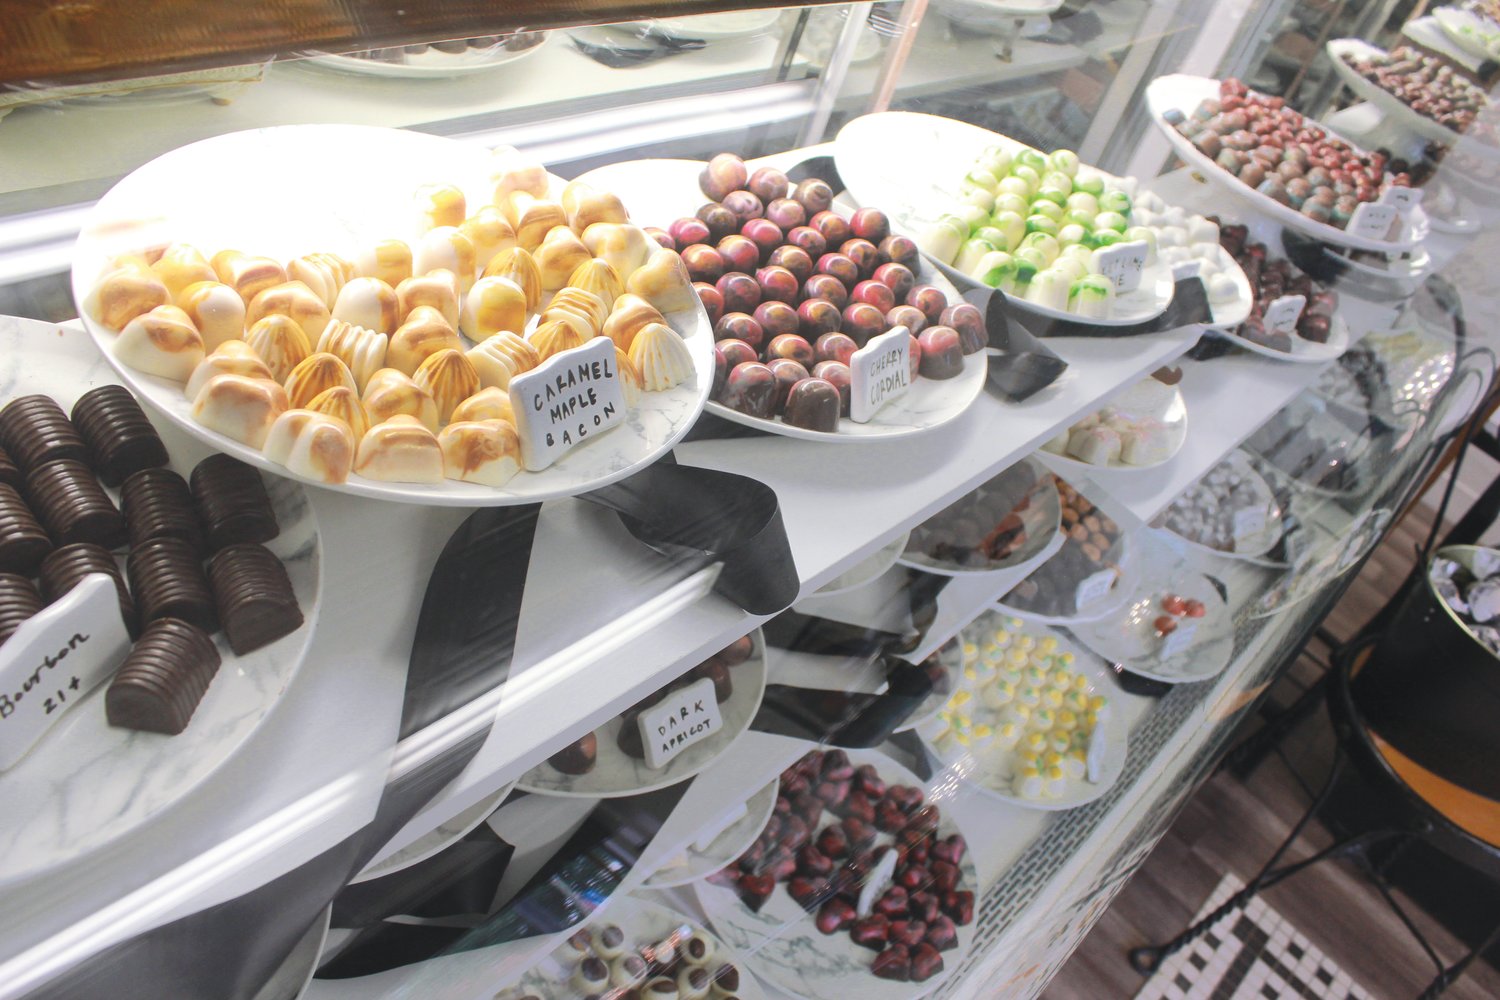 Dozens of truffles and bagged candies are on display at the front counter at the Chocolate Cellar Deux in downtown Pittsboro. The wide variety of truffle flavors include chocolate, saltred caramel, Irish cream, lemon merengue, glazed pecan, pomegranete and more.